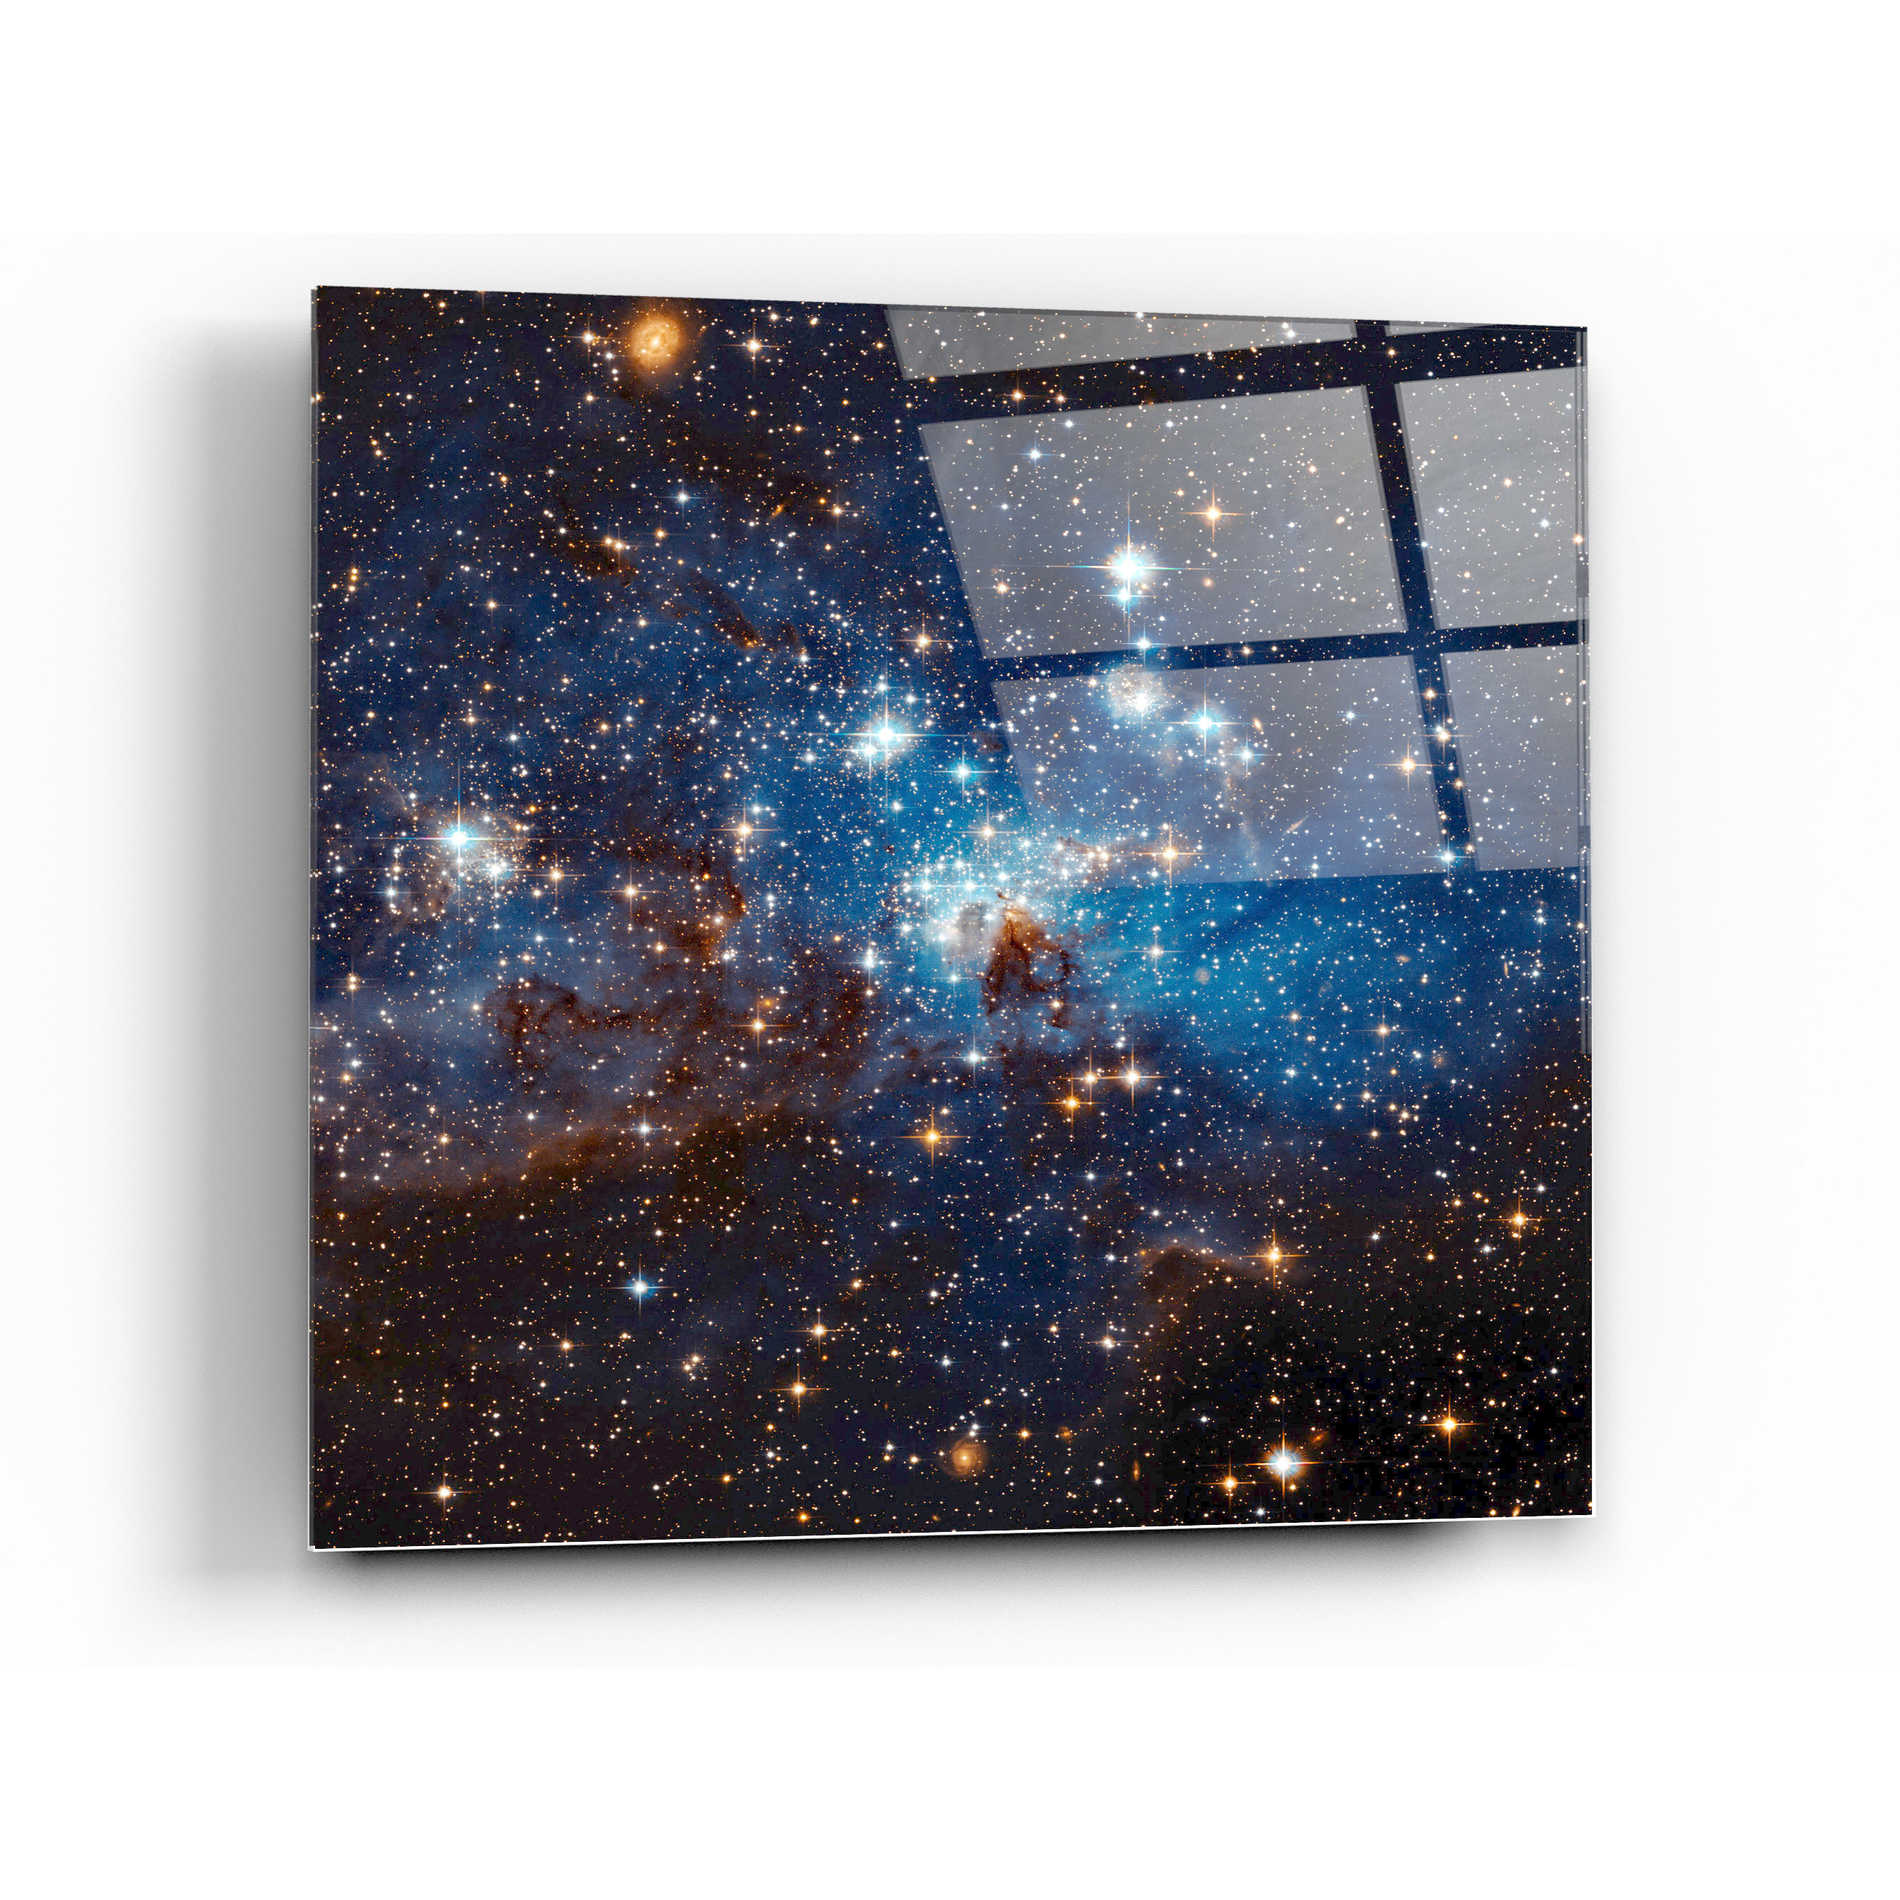 Epic Art "LH 95 Star Cluster" Hubble Space Telescope Acrylic Glass Wall Art